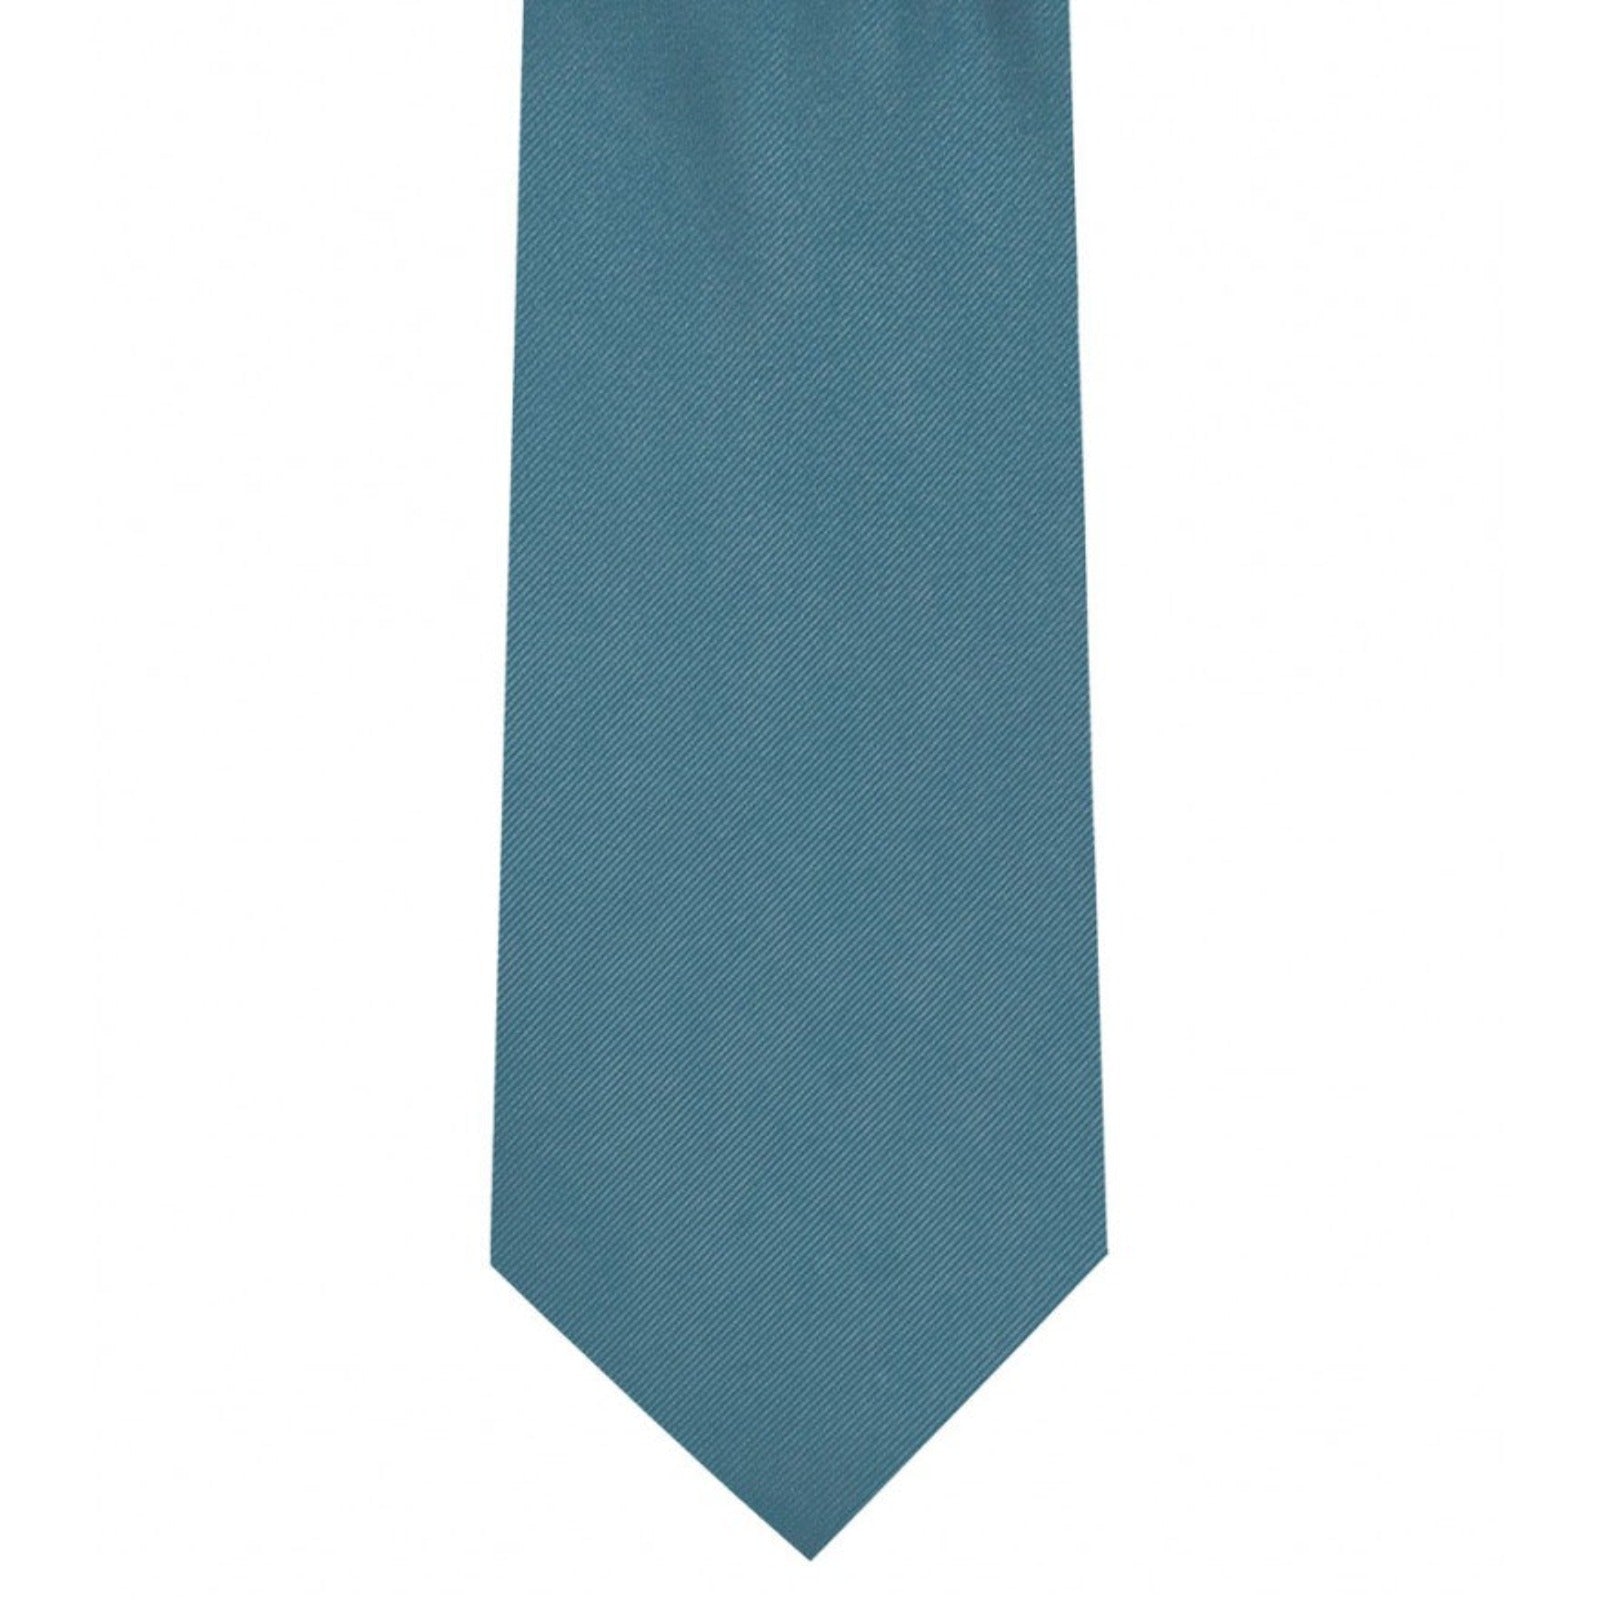 Classic Carolina Blue Tie Ultra Skinny tie width 2.25 inches With Matching Pocket Square | KCT Menswear